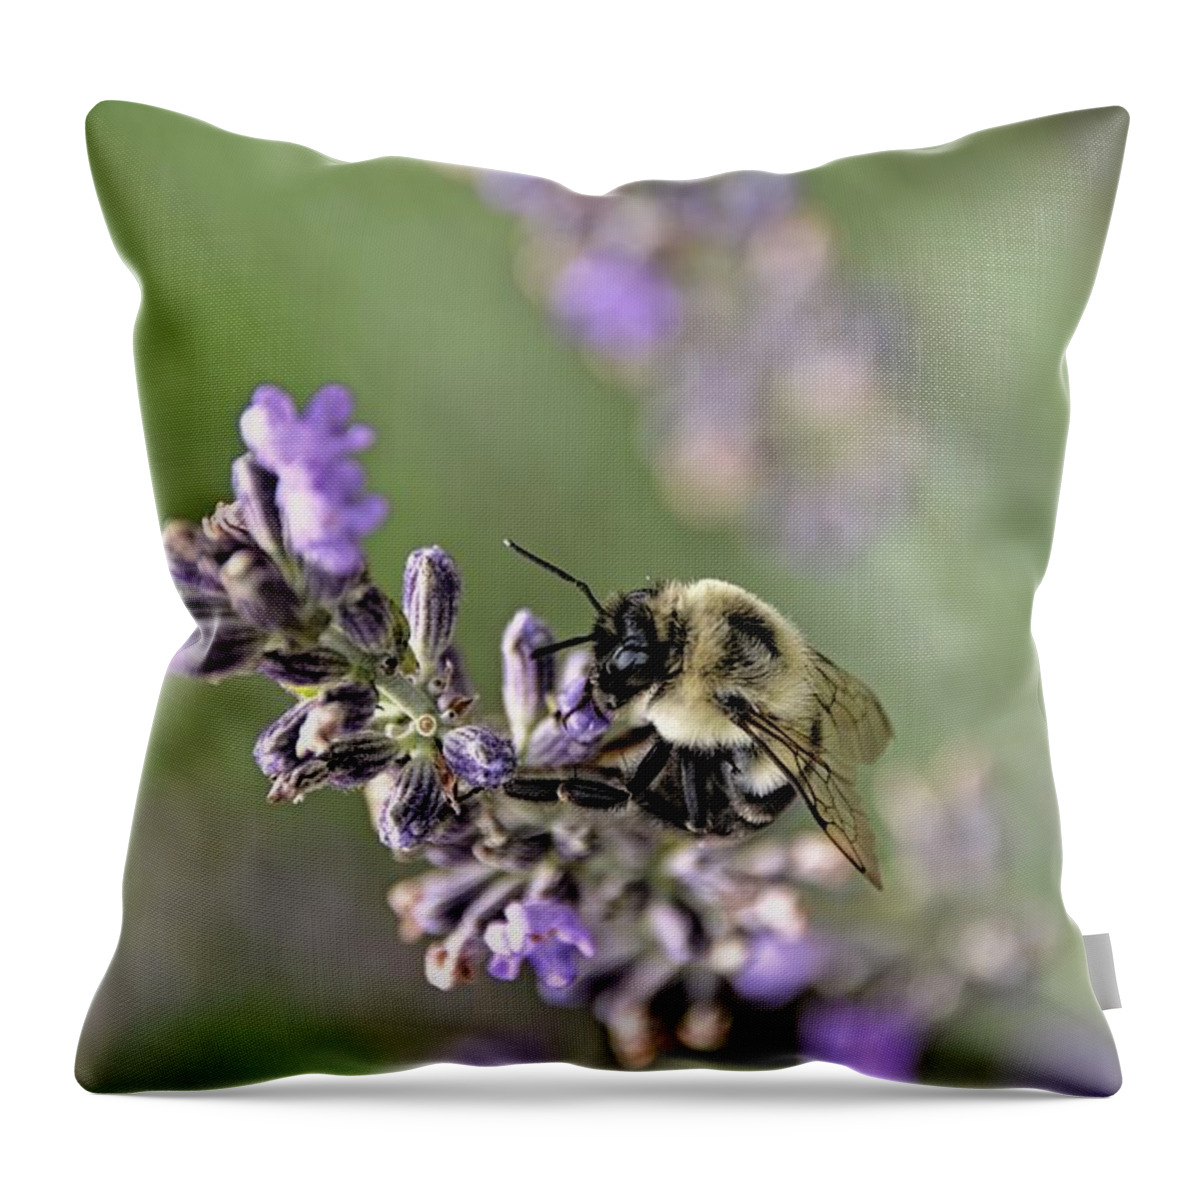 Bee Throw Pillow featuring the photograph Bumblebee On The Lavender Field 3 by Andrea Anderegg